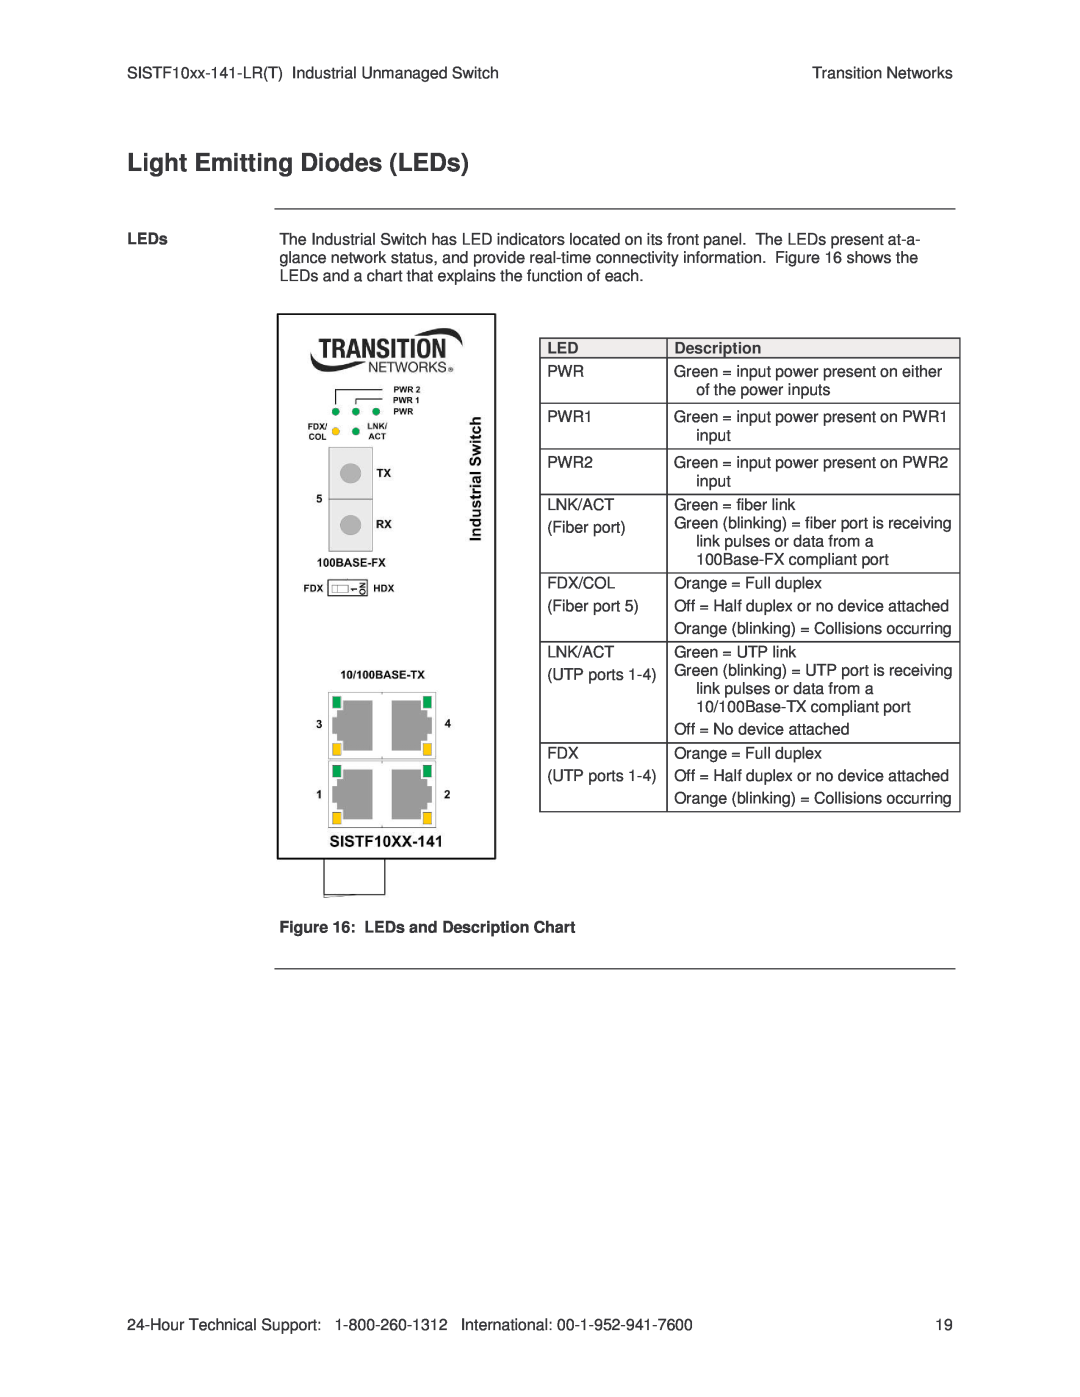 Transition Networks SISTF10xx-141-LR(T) installation manual Light Emitting Diodes LEDs 